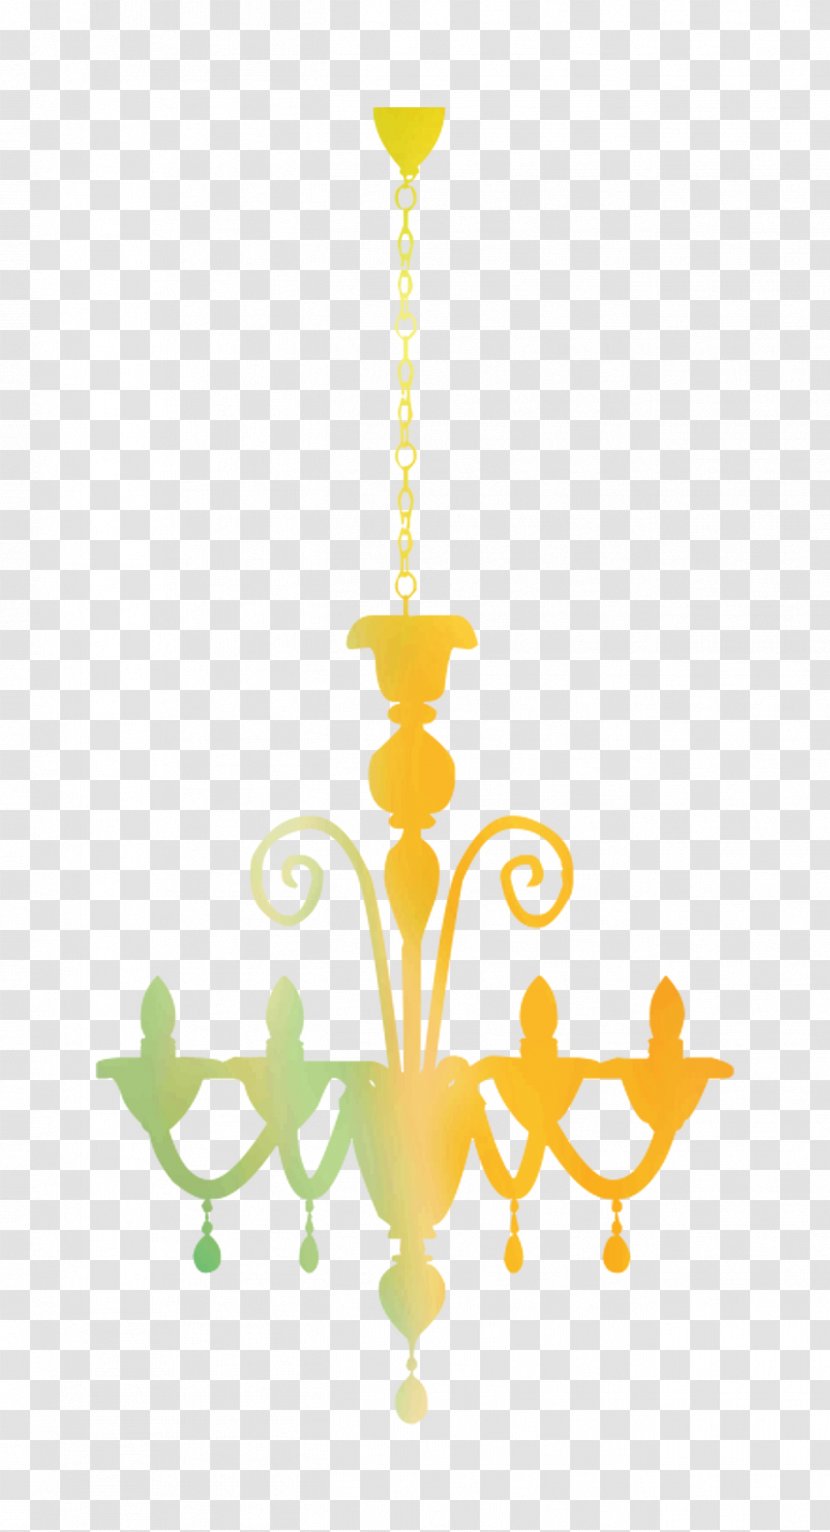 Chandelier Ceiling Fixture Product Candle Yellow - Interior Design - Light Transparent PNG